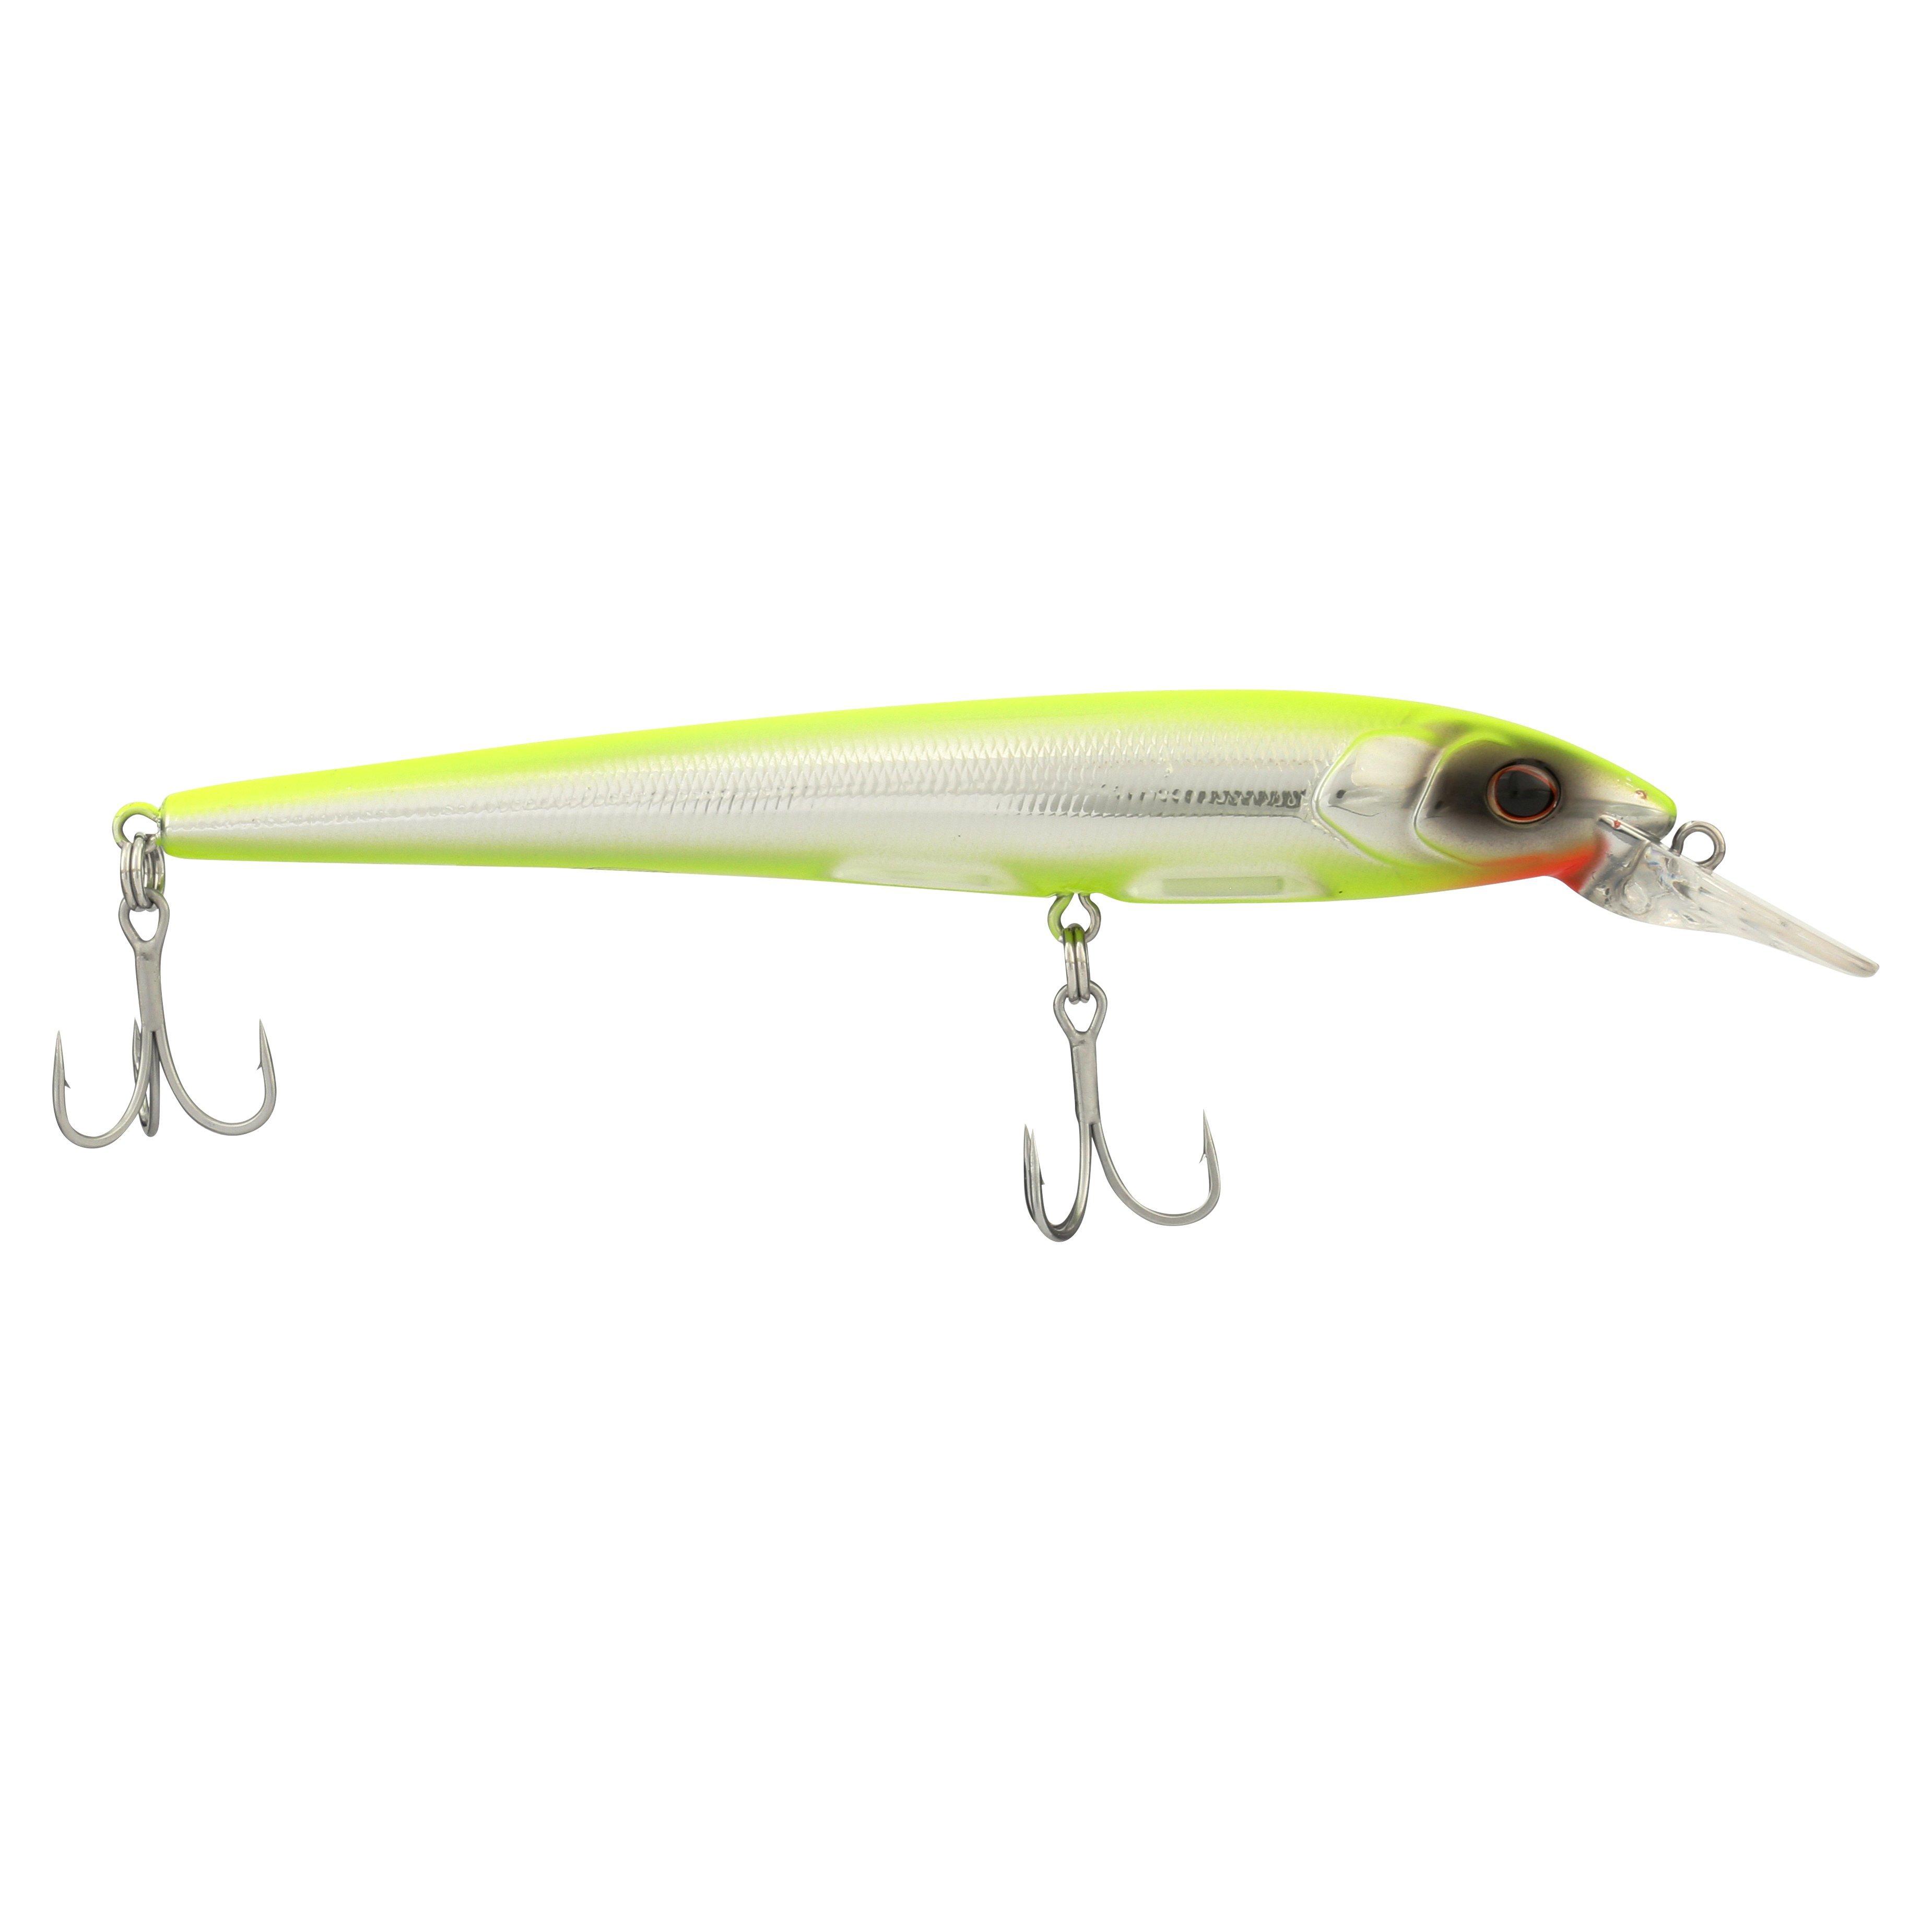 23 New Product Review - Berkley Saltwater Powerbait and Gulp Chrome 